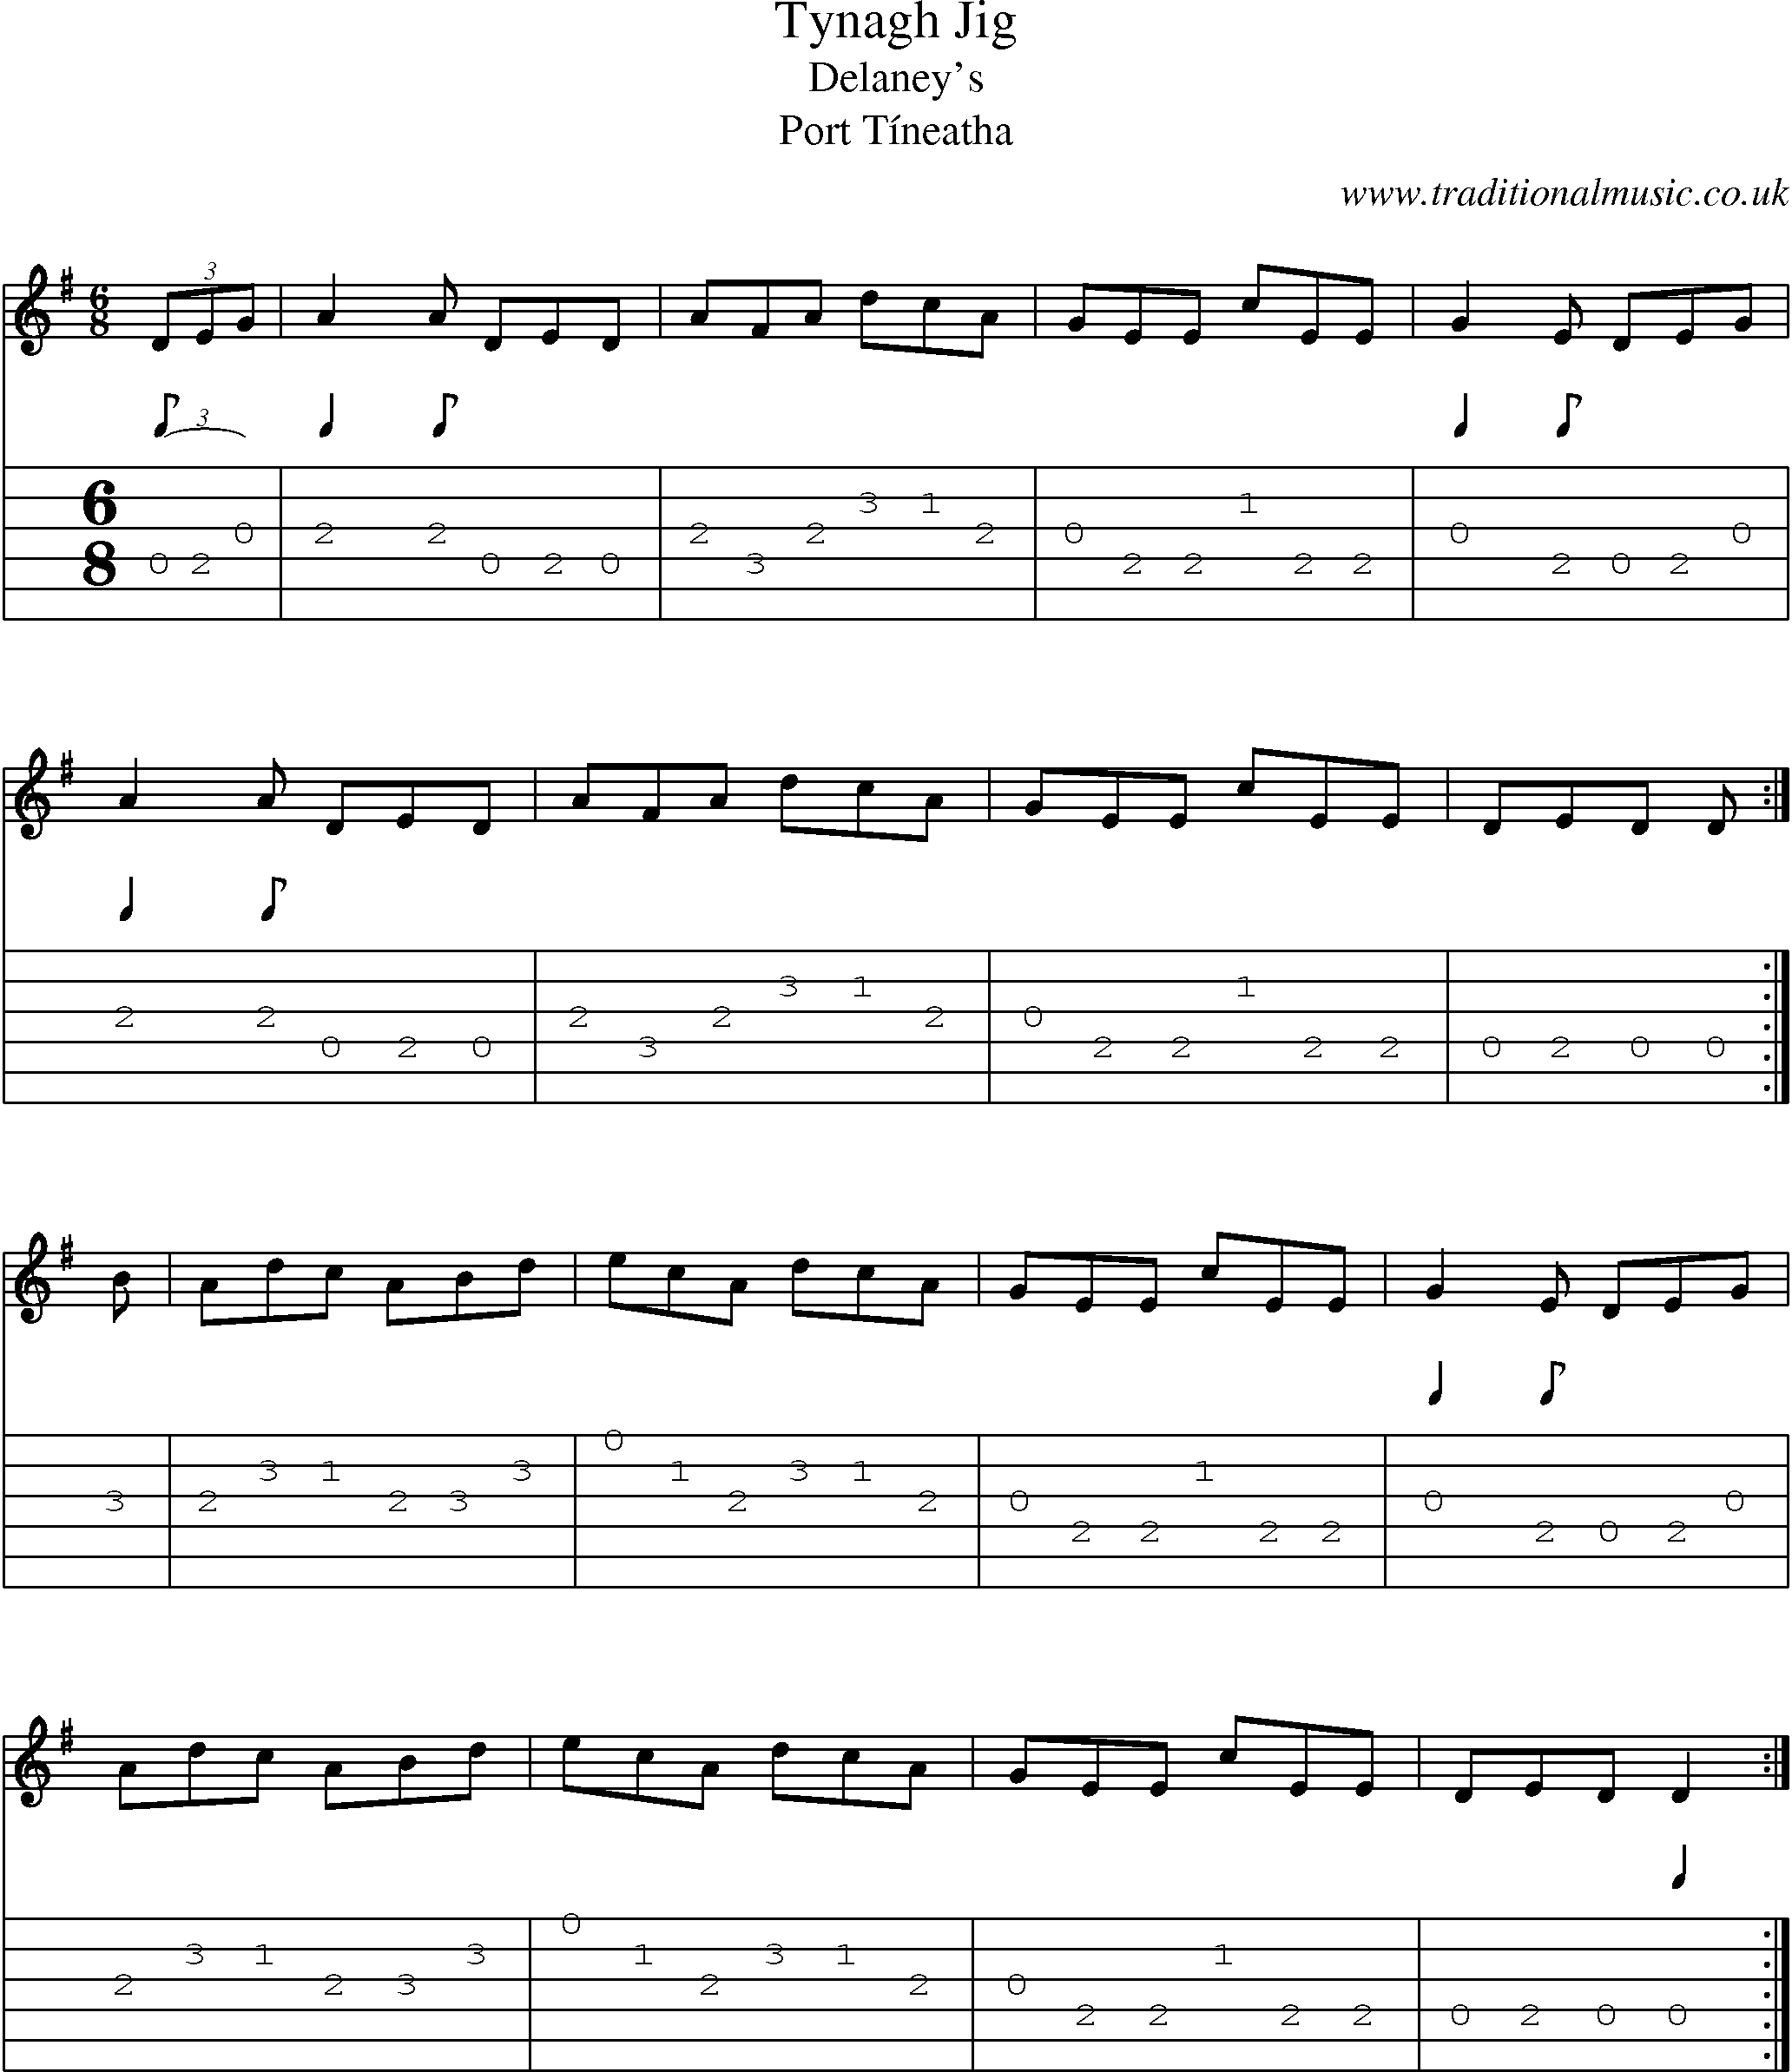 Music Score and Guitar Tabs for Tynagh Jig